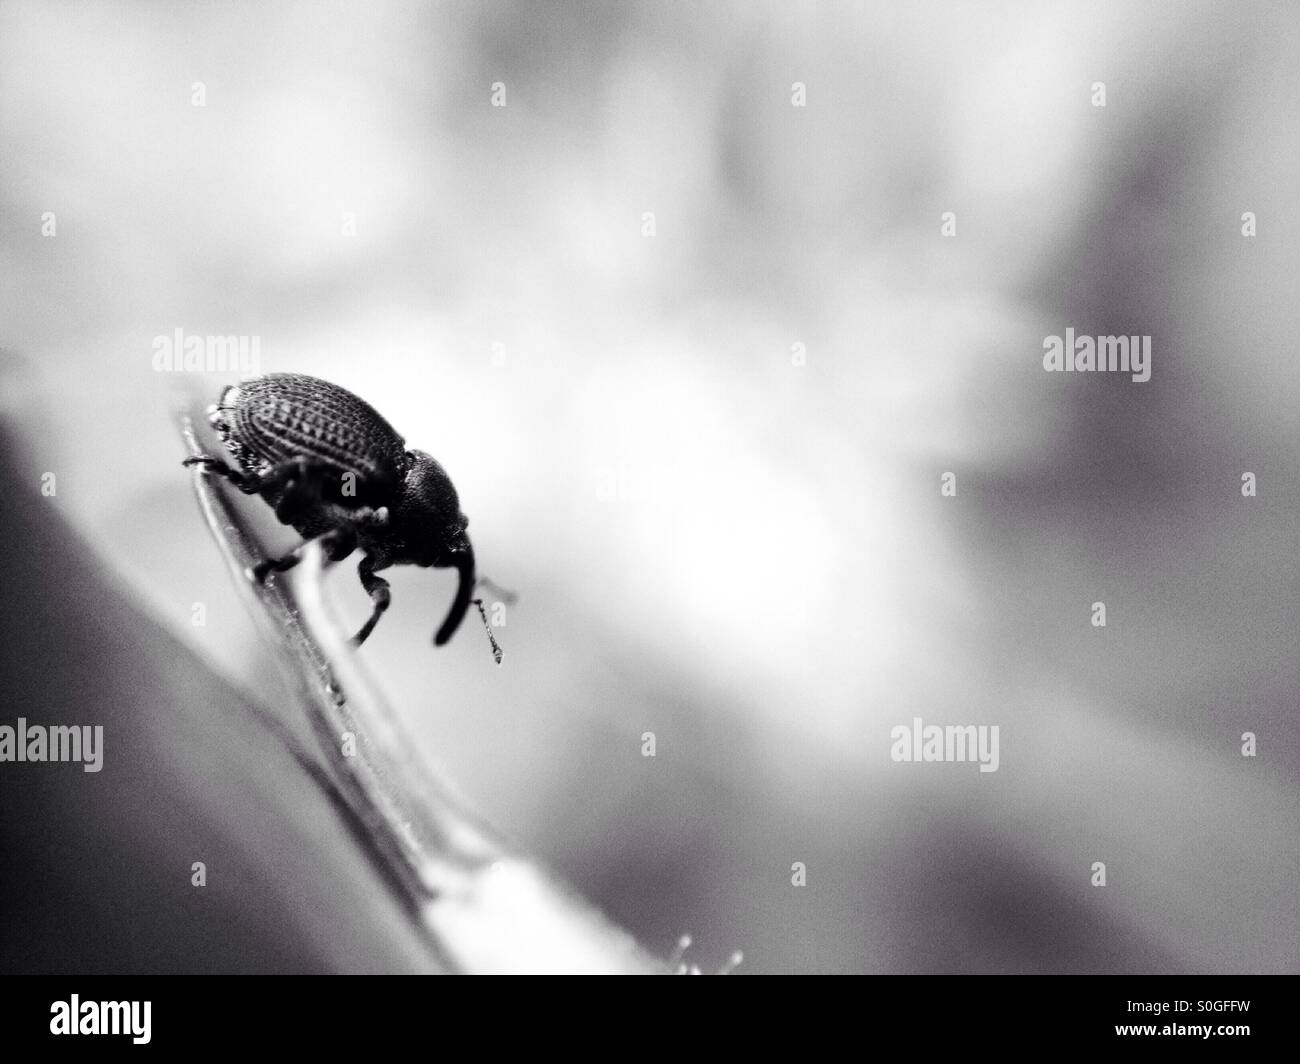 Weevil in black and white Stock Photo